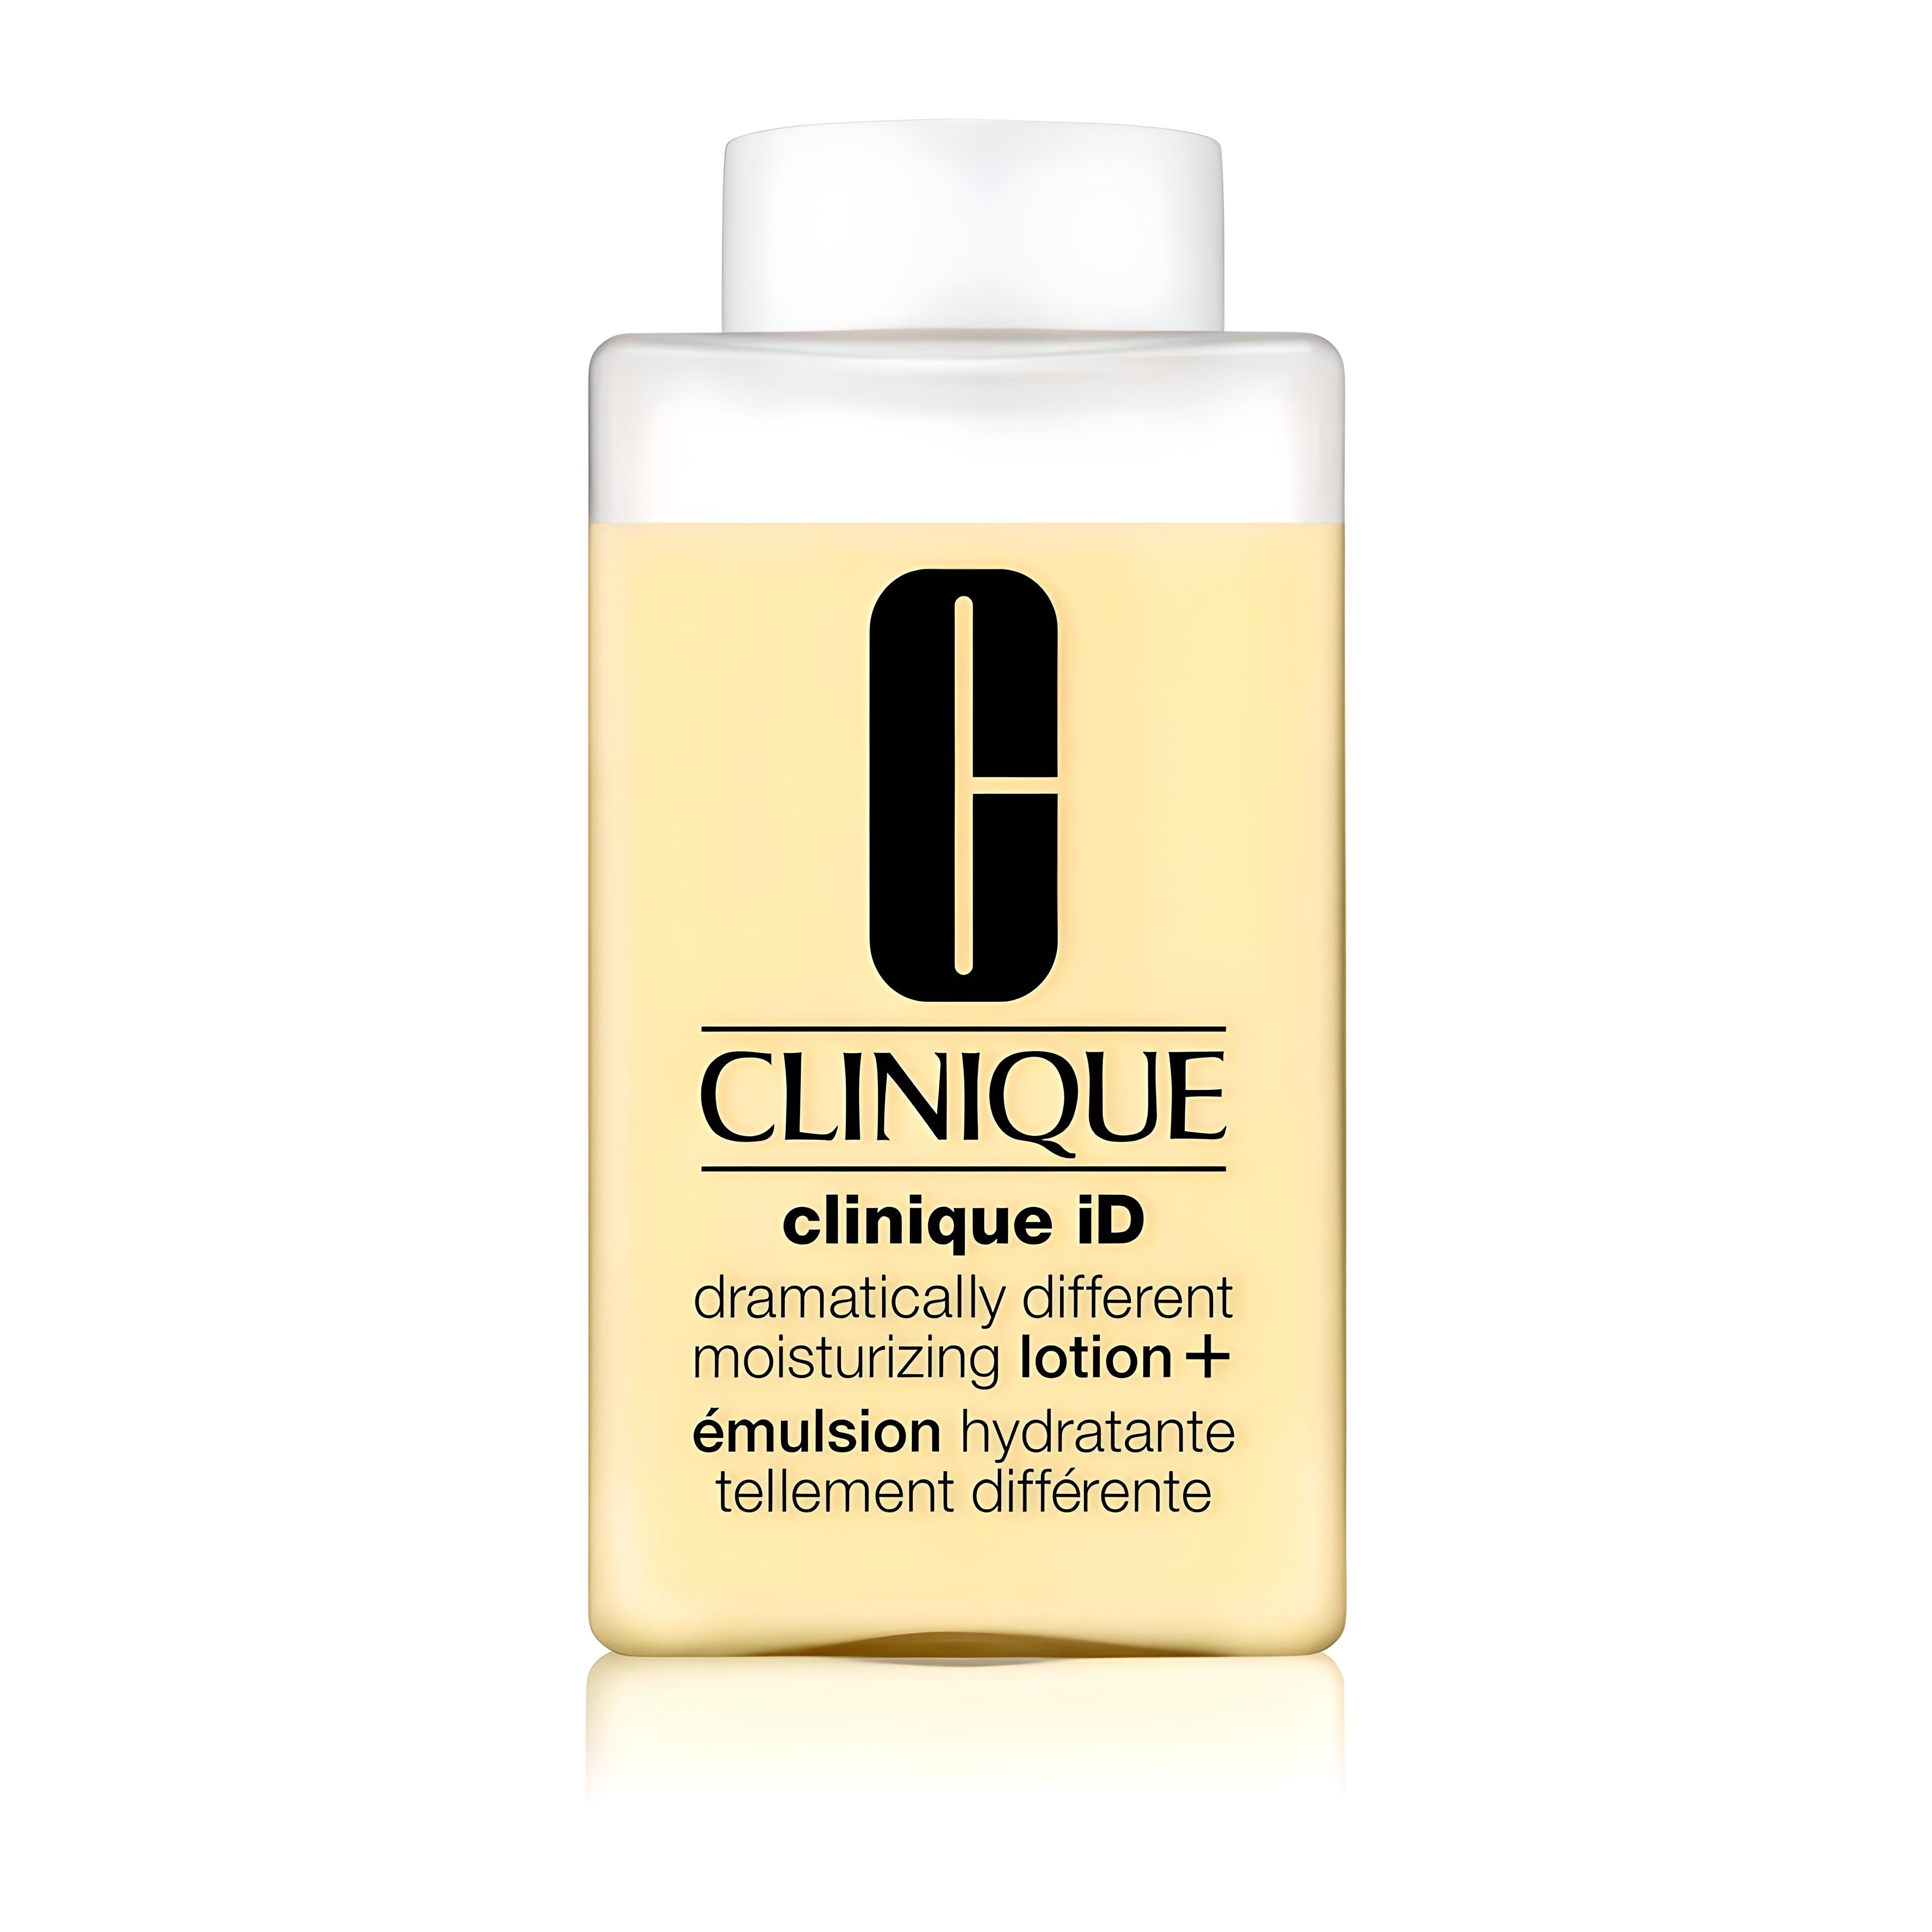 CLINIQUE ID dramatically different lotion+ Gesichtspflege CLINIQUE   